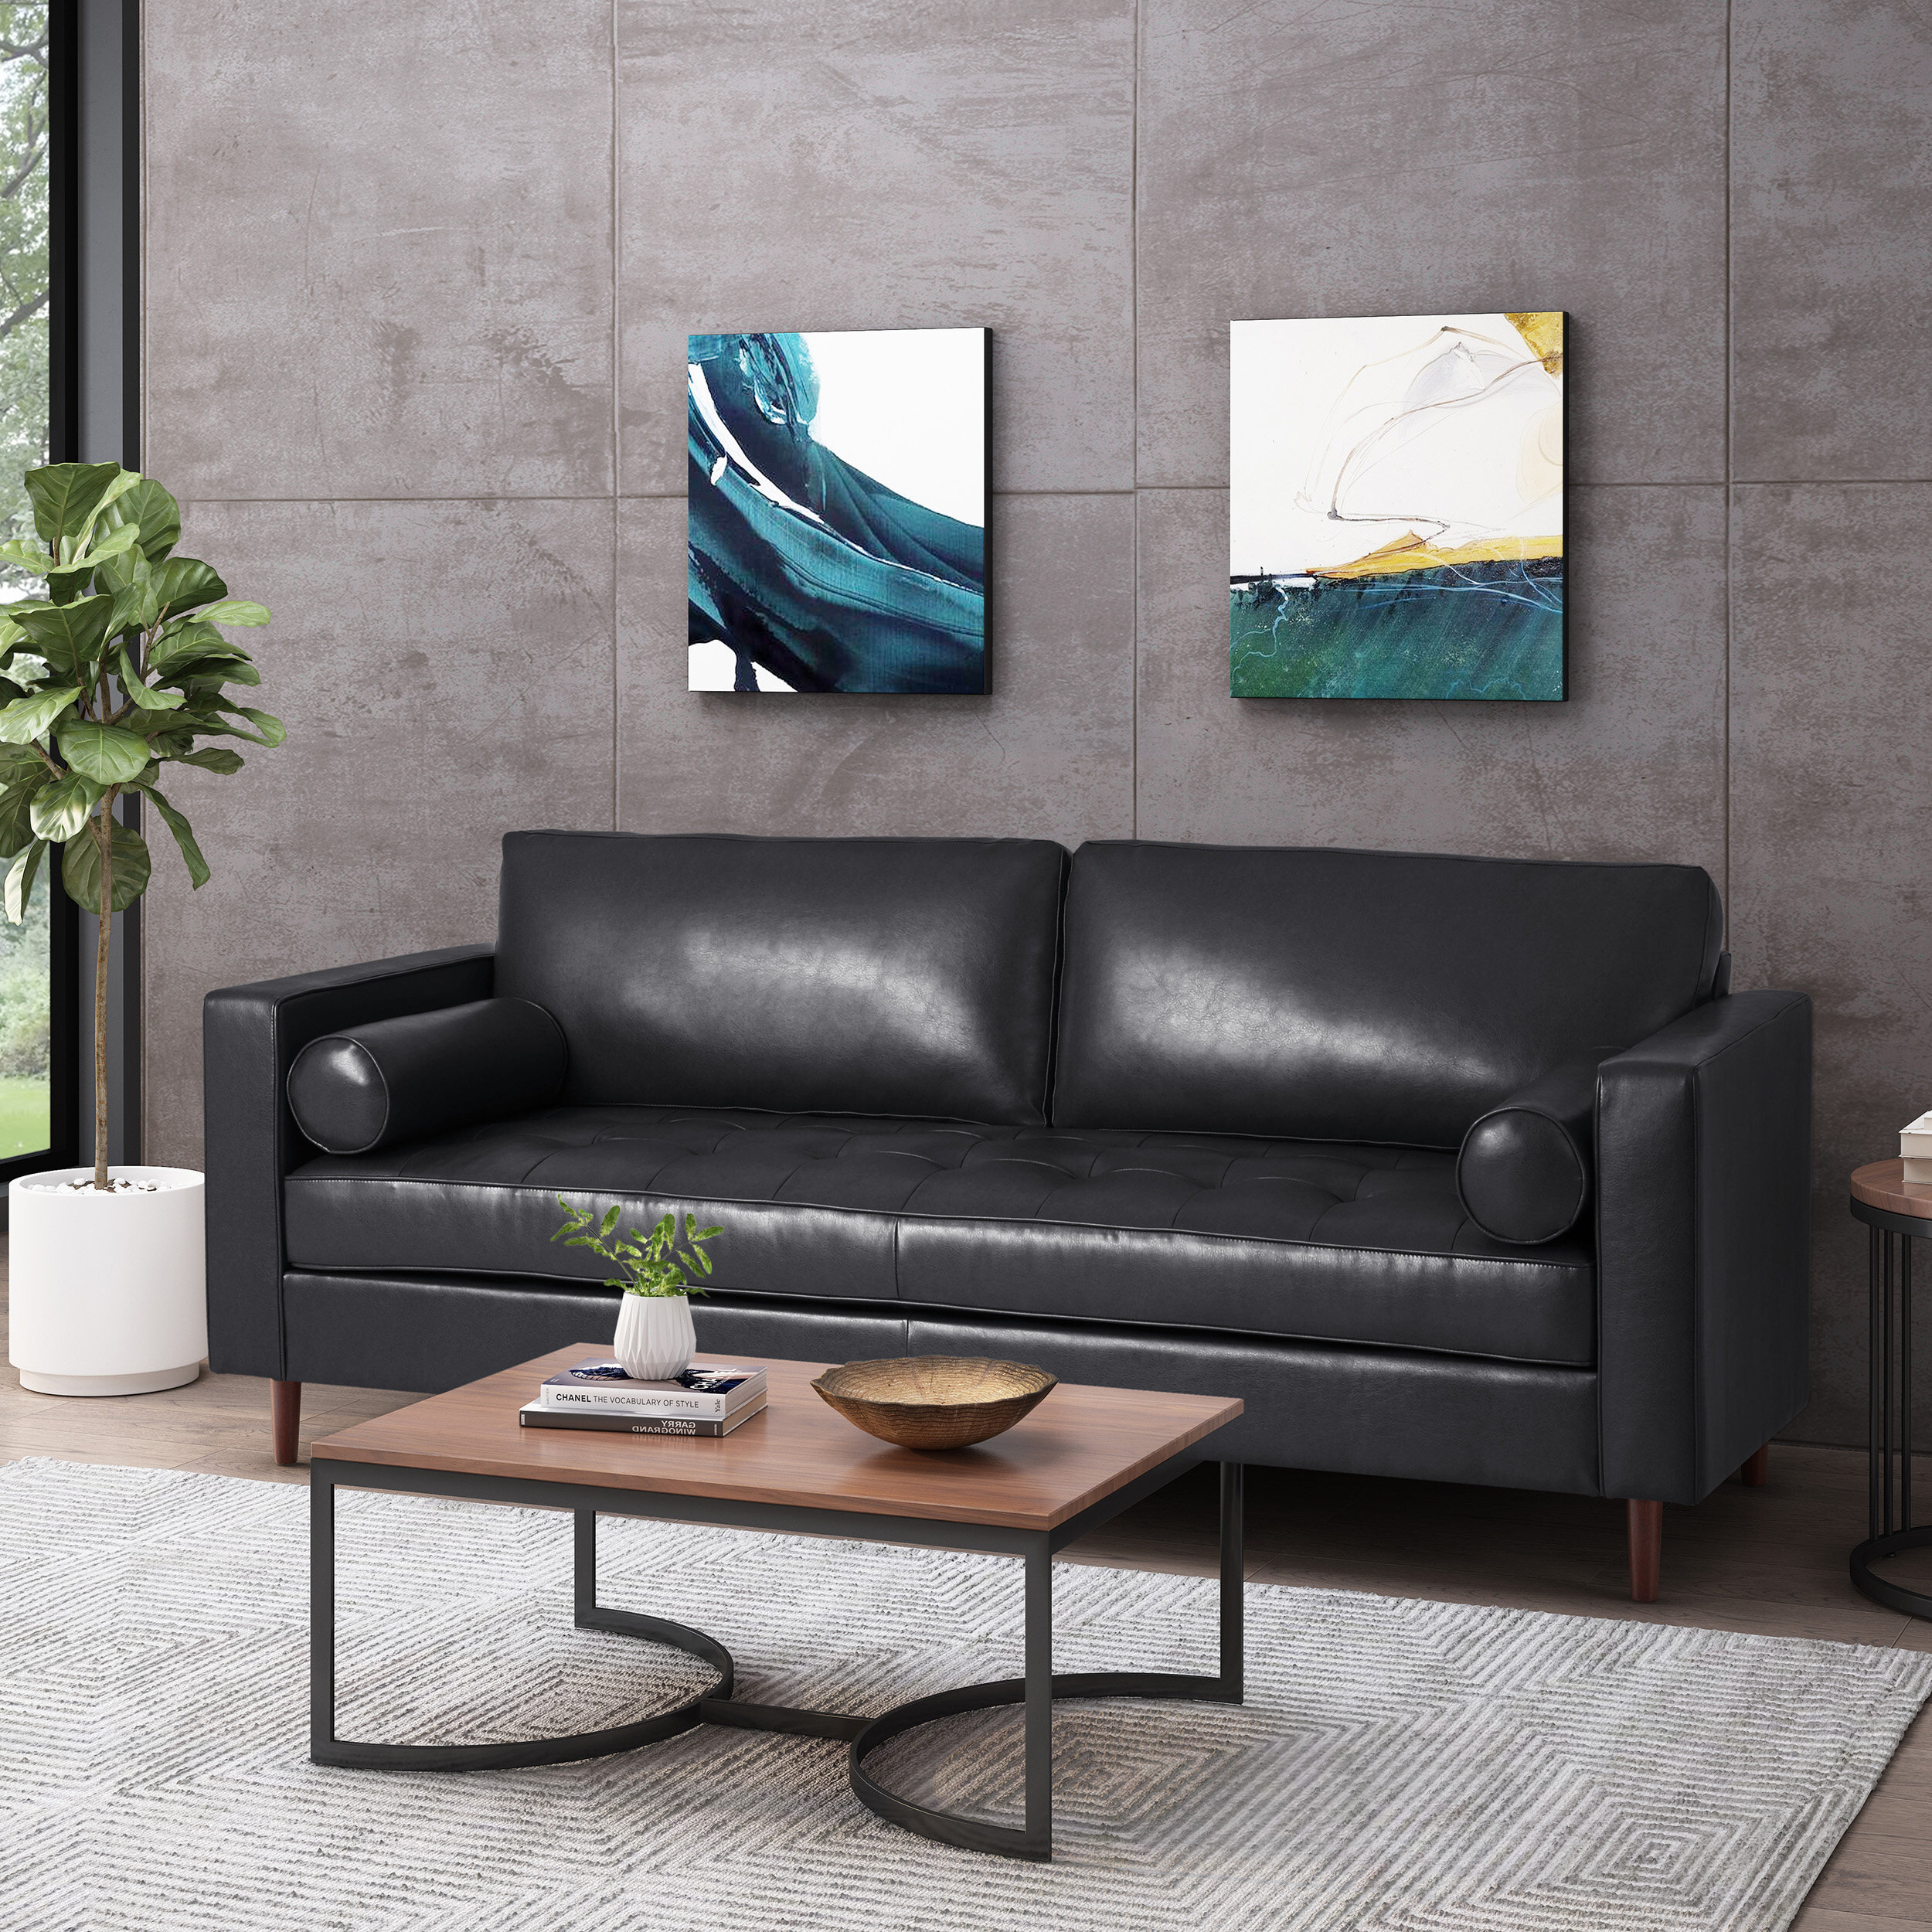 Purtell 82.25 Faux Leather Square Arm Sofa Corrigan Studio Upholstery Color: Midnight Black Faux Leather